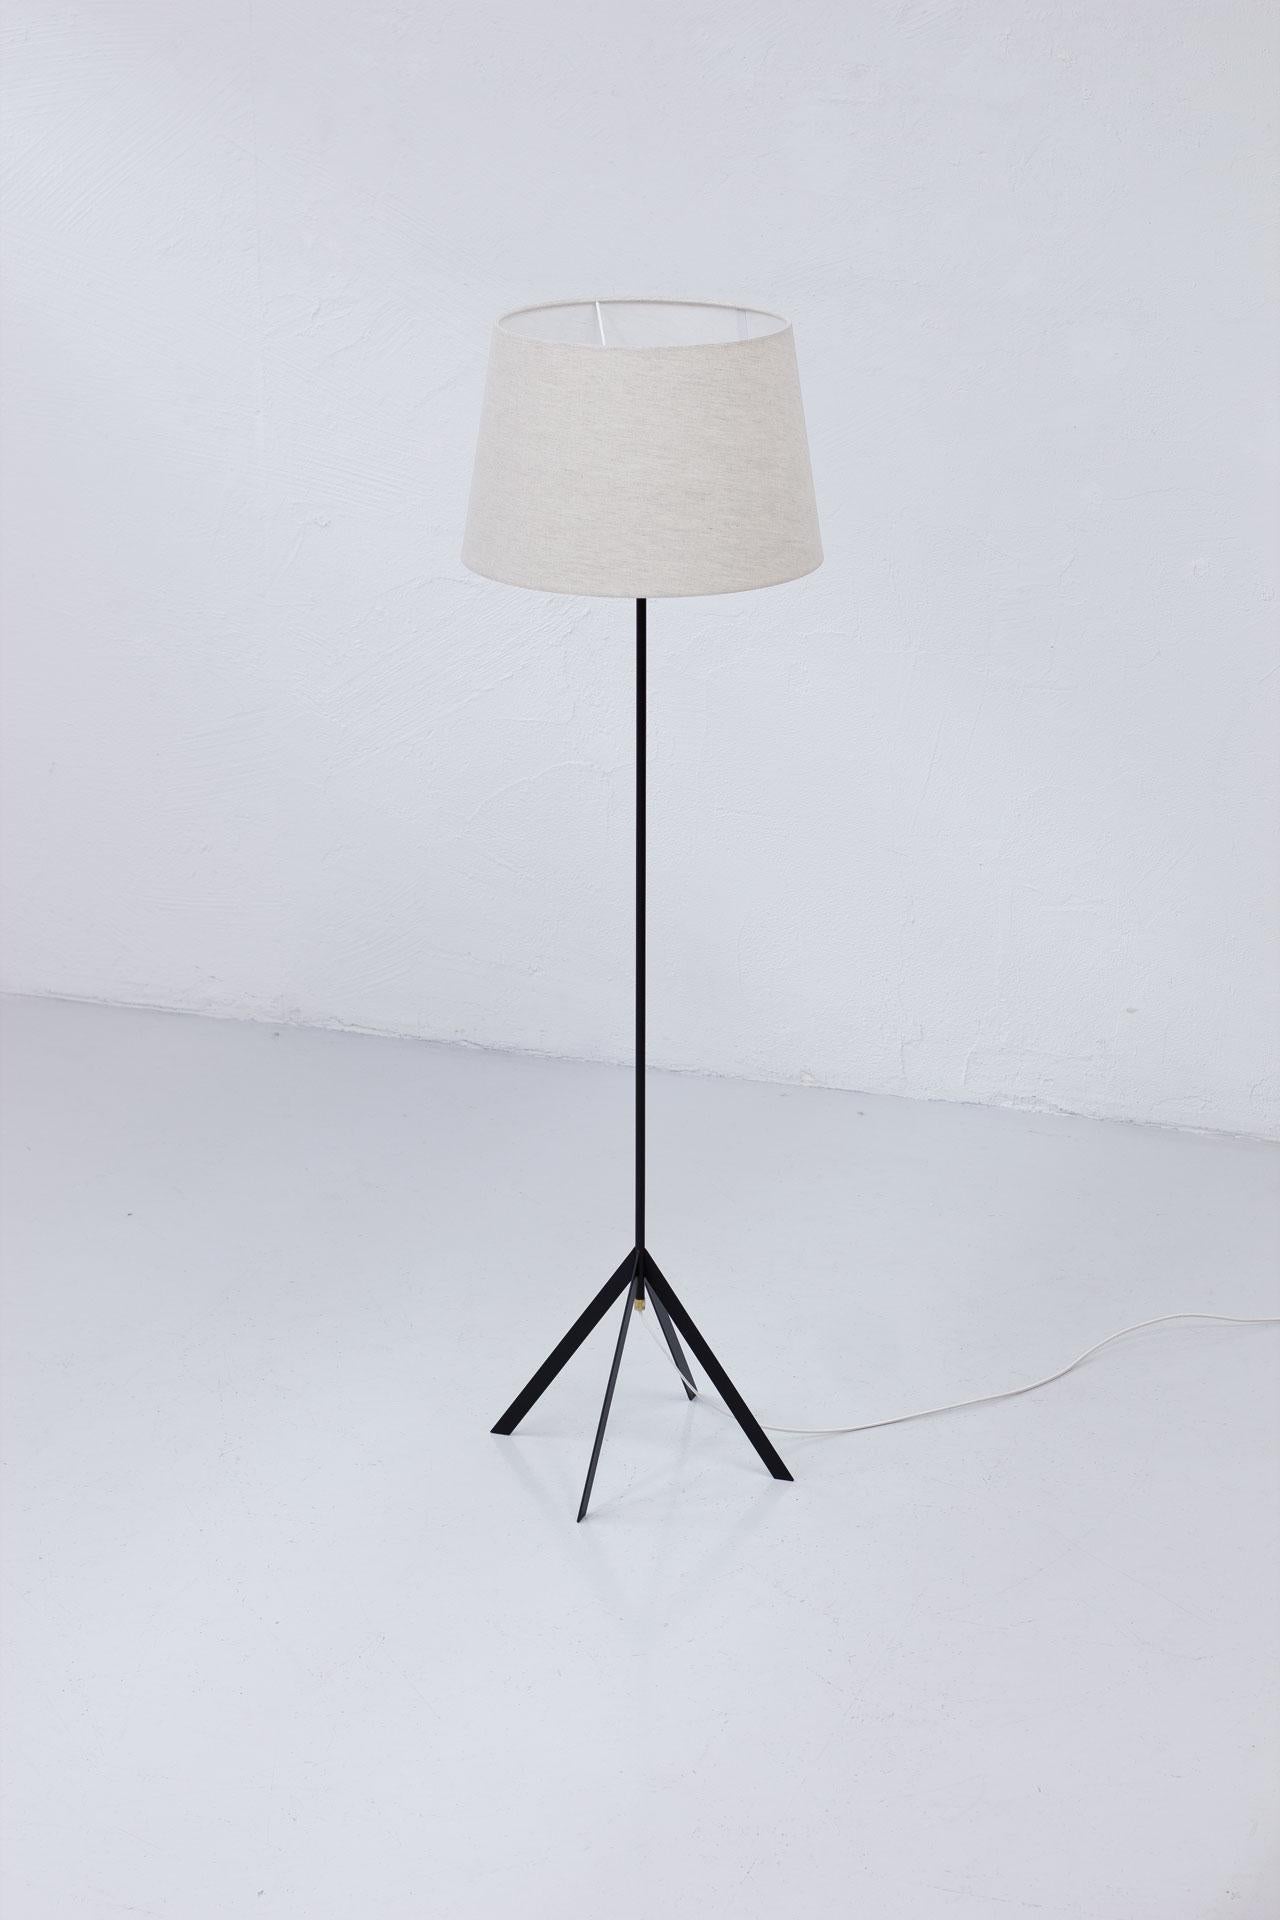 Elegant Swedish floor lamp from the 1950s from unknown maker and/ or designer. The base is engraved K1 and has the 